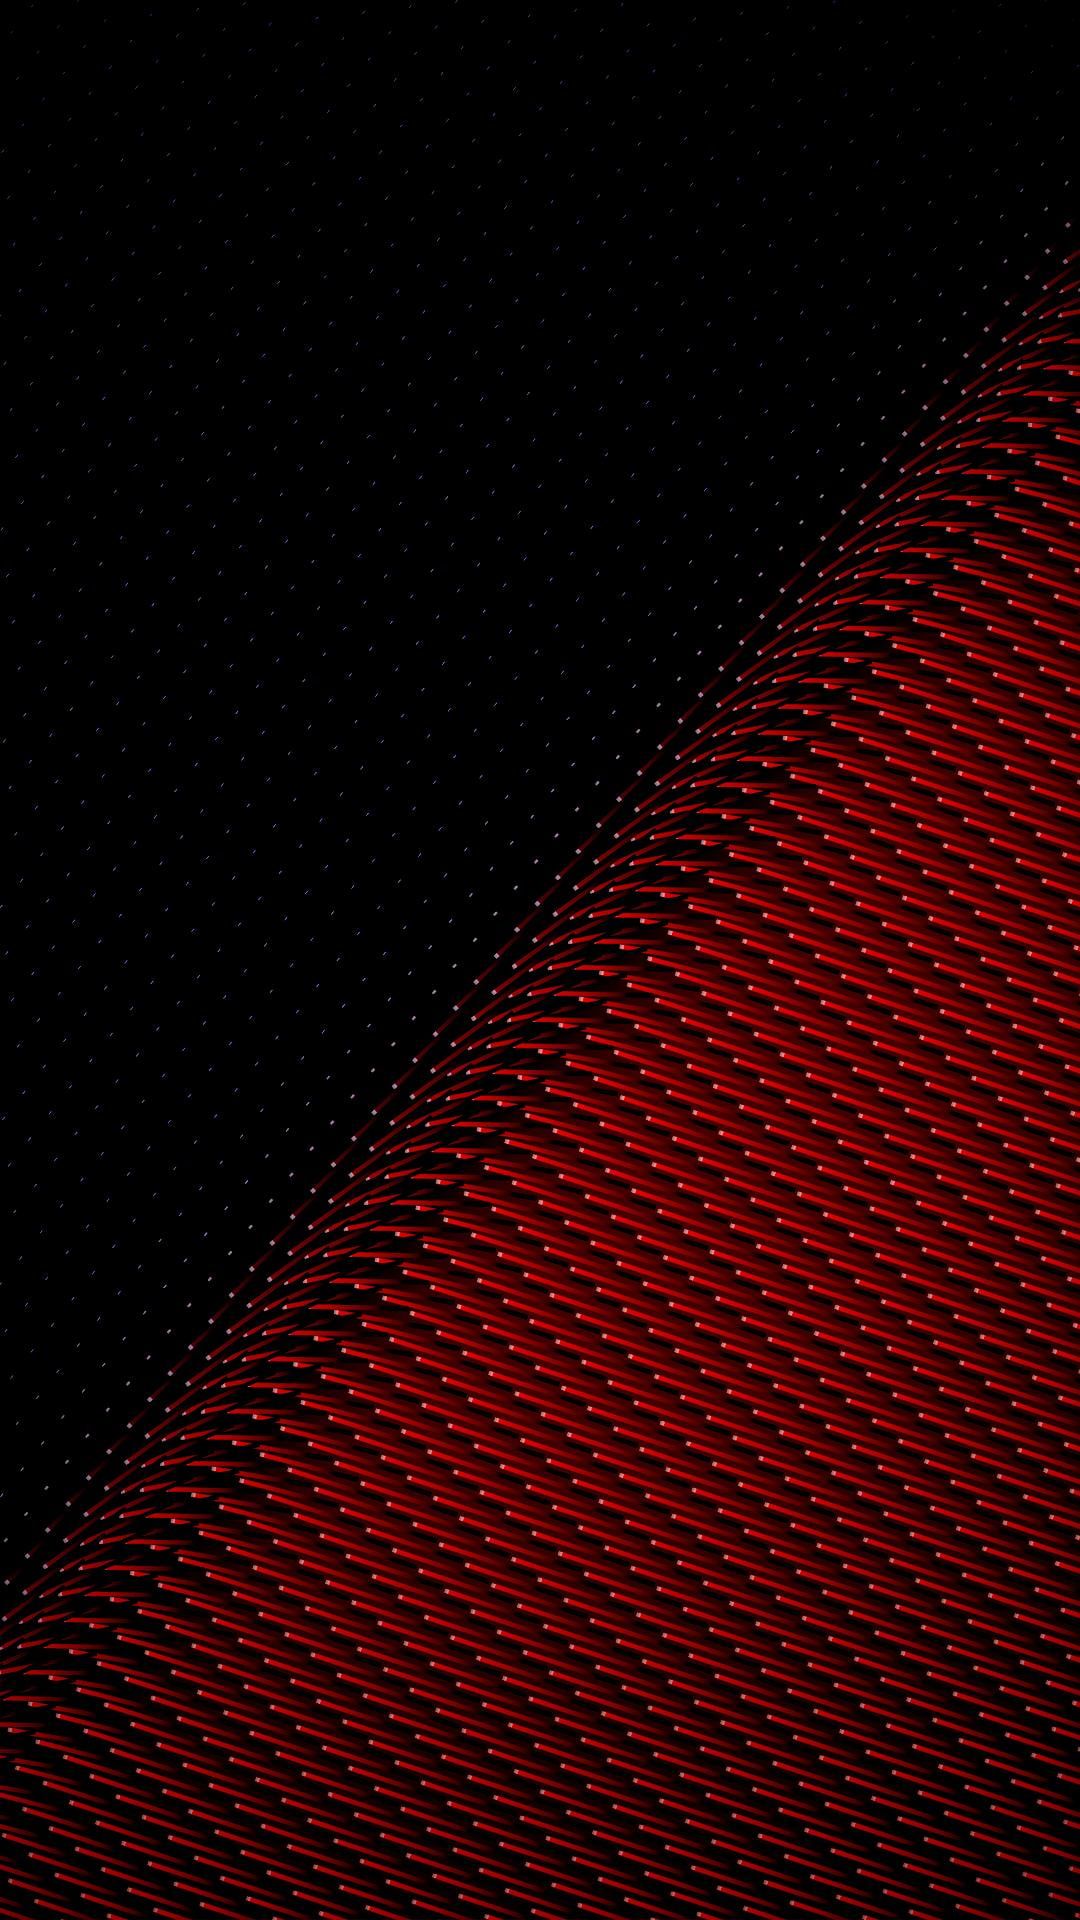 Abstract Amoled Black Background Portrait Display 1080p